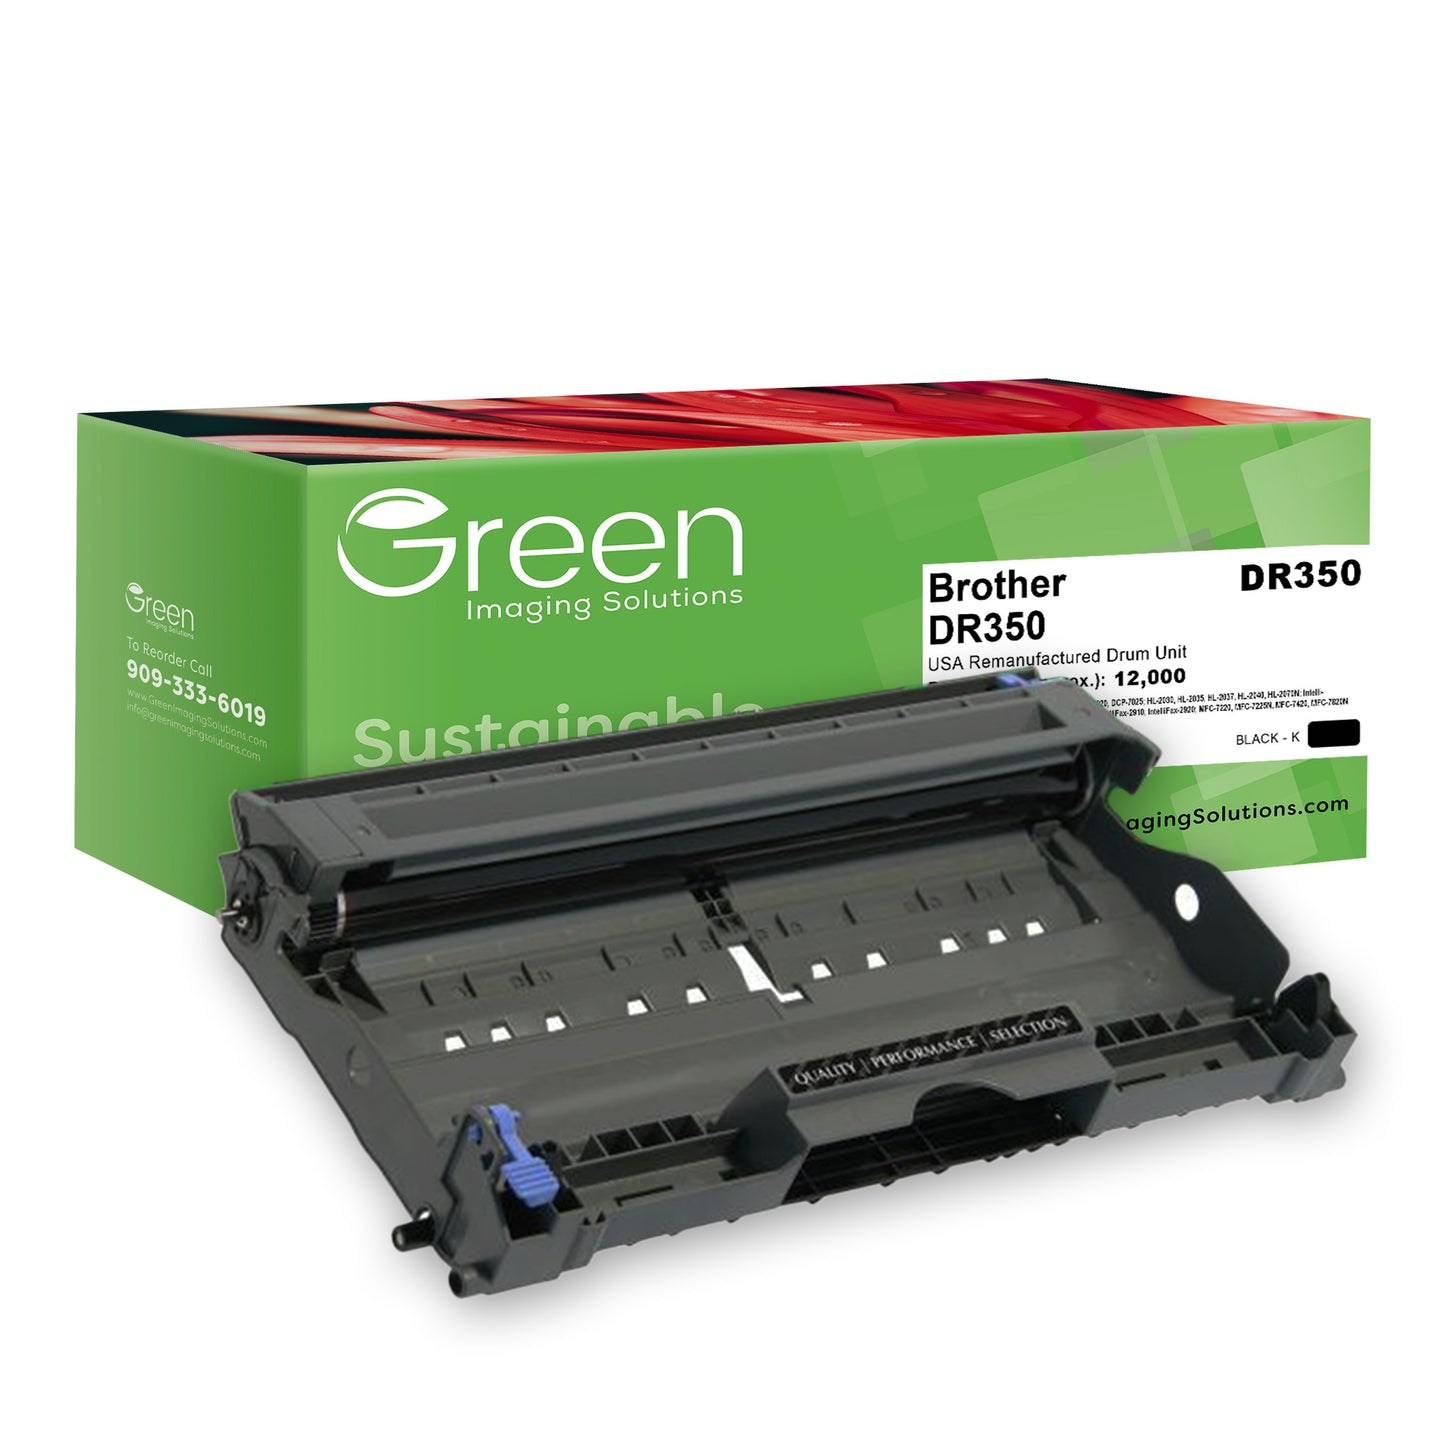 Green Imaging Solutions USA Remanufactured Drum Unit for Brother DR350